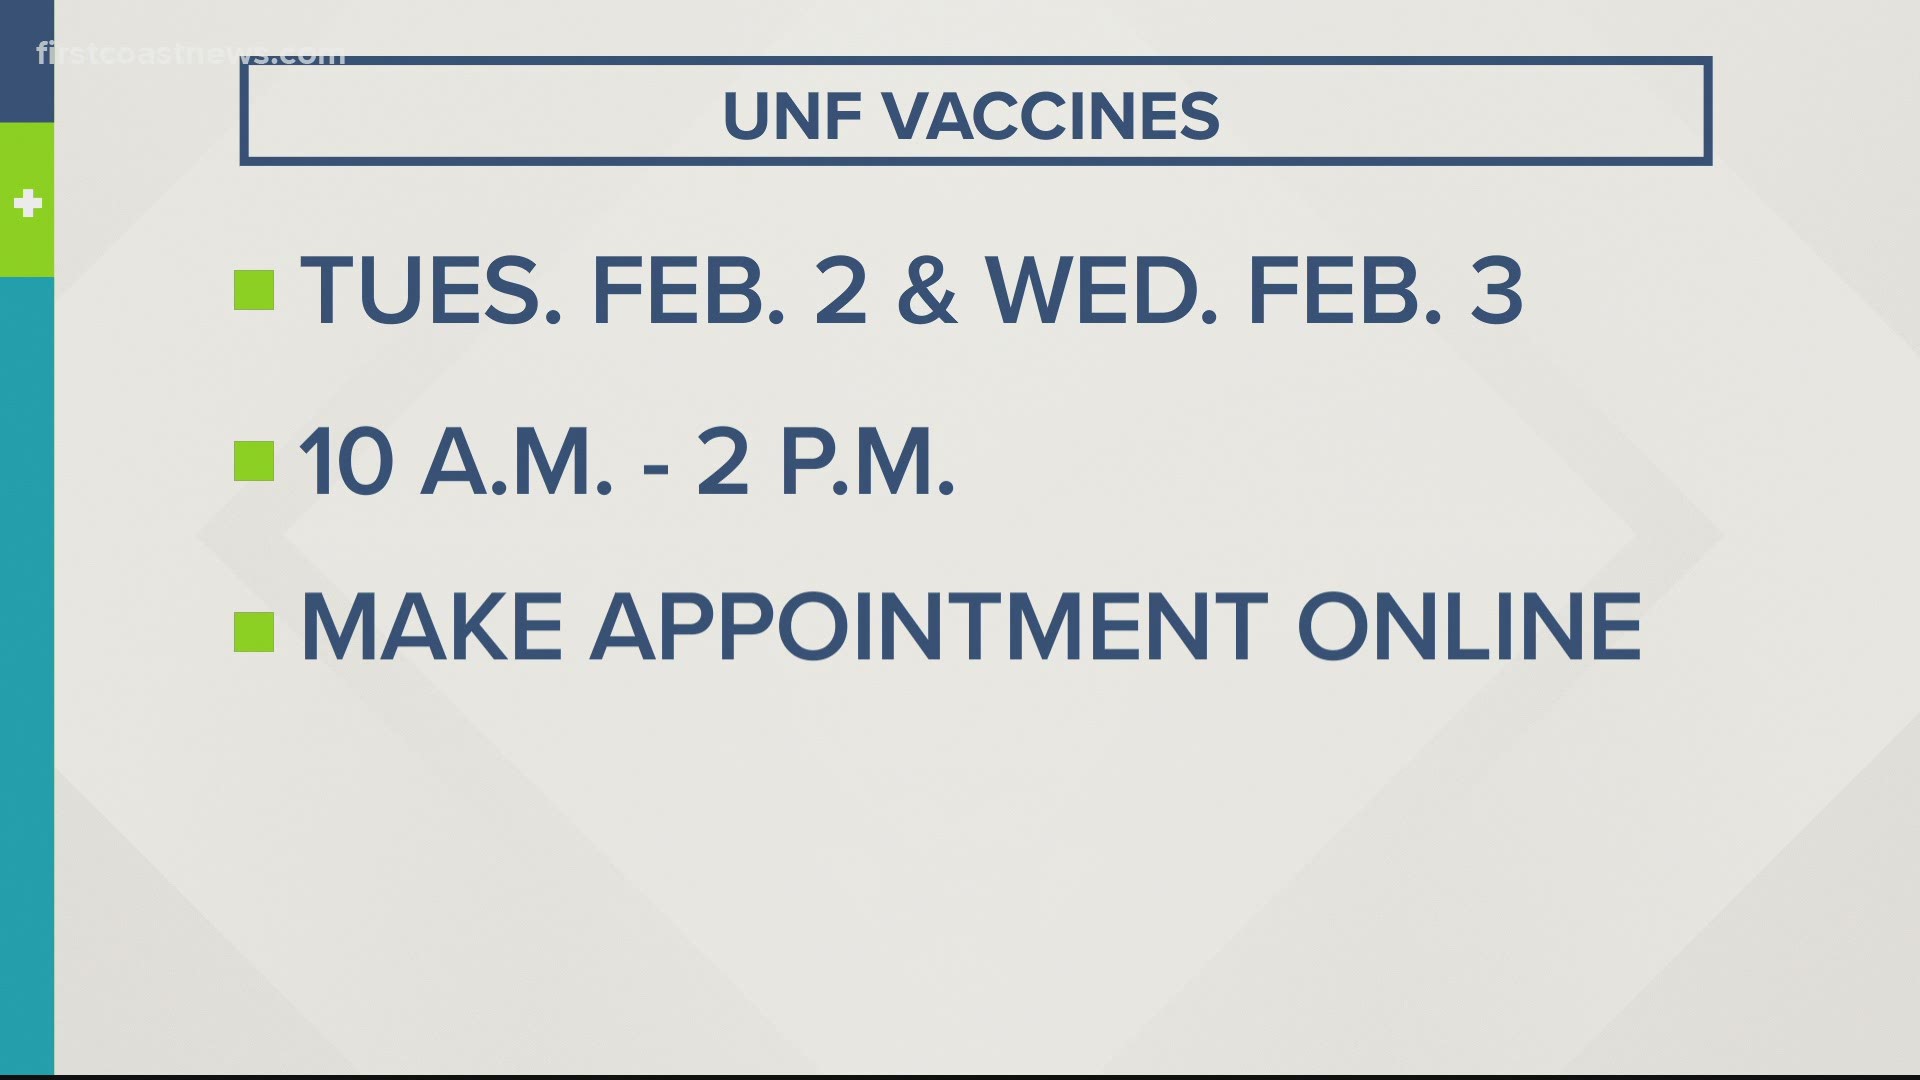 The clinic will be at the UNF Field House on Feb. 2 and Feb. 3. Employees must schedule an appointment and fill out a form before receiving the vaccine.